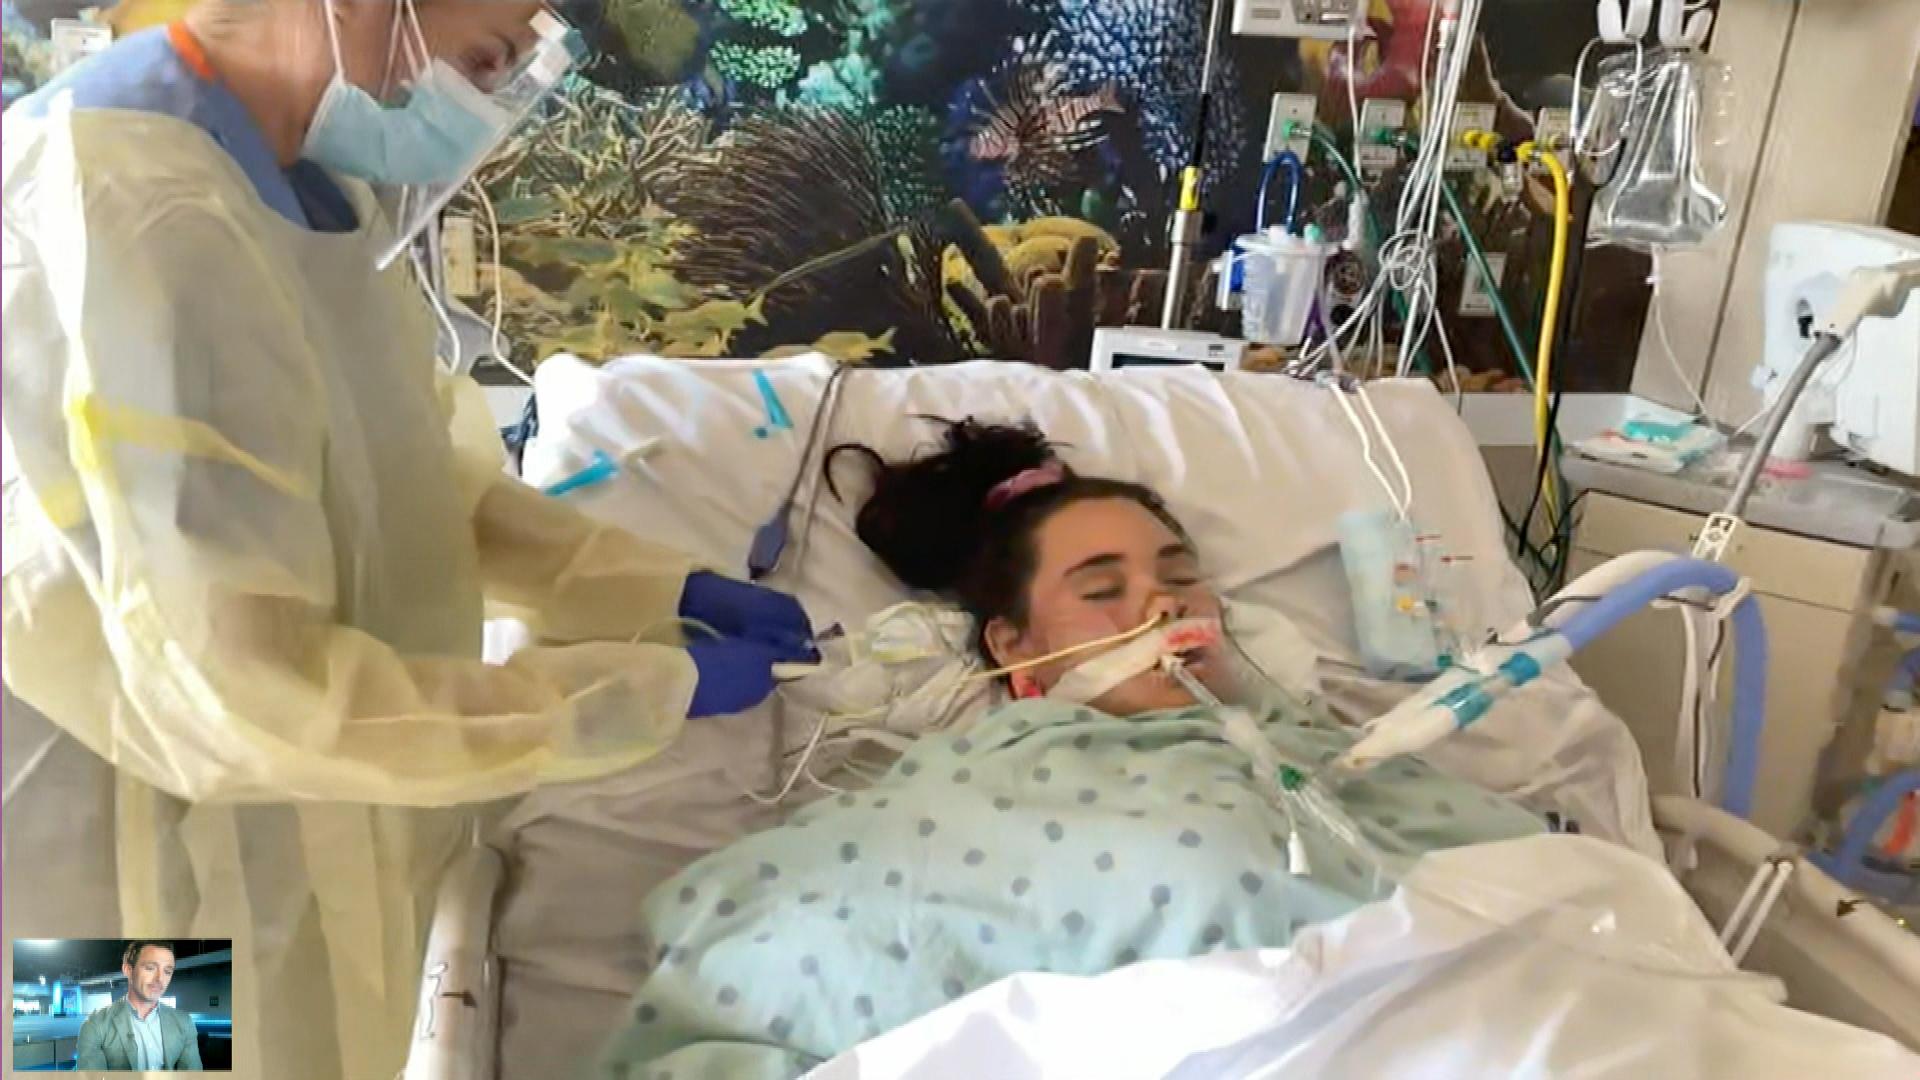 Florida Teen On Ventilator Was About To